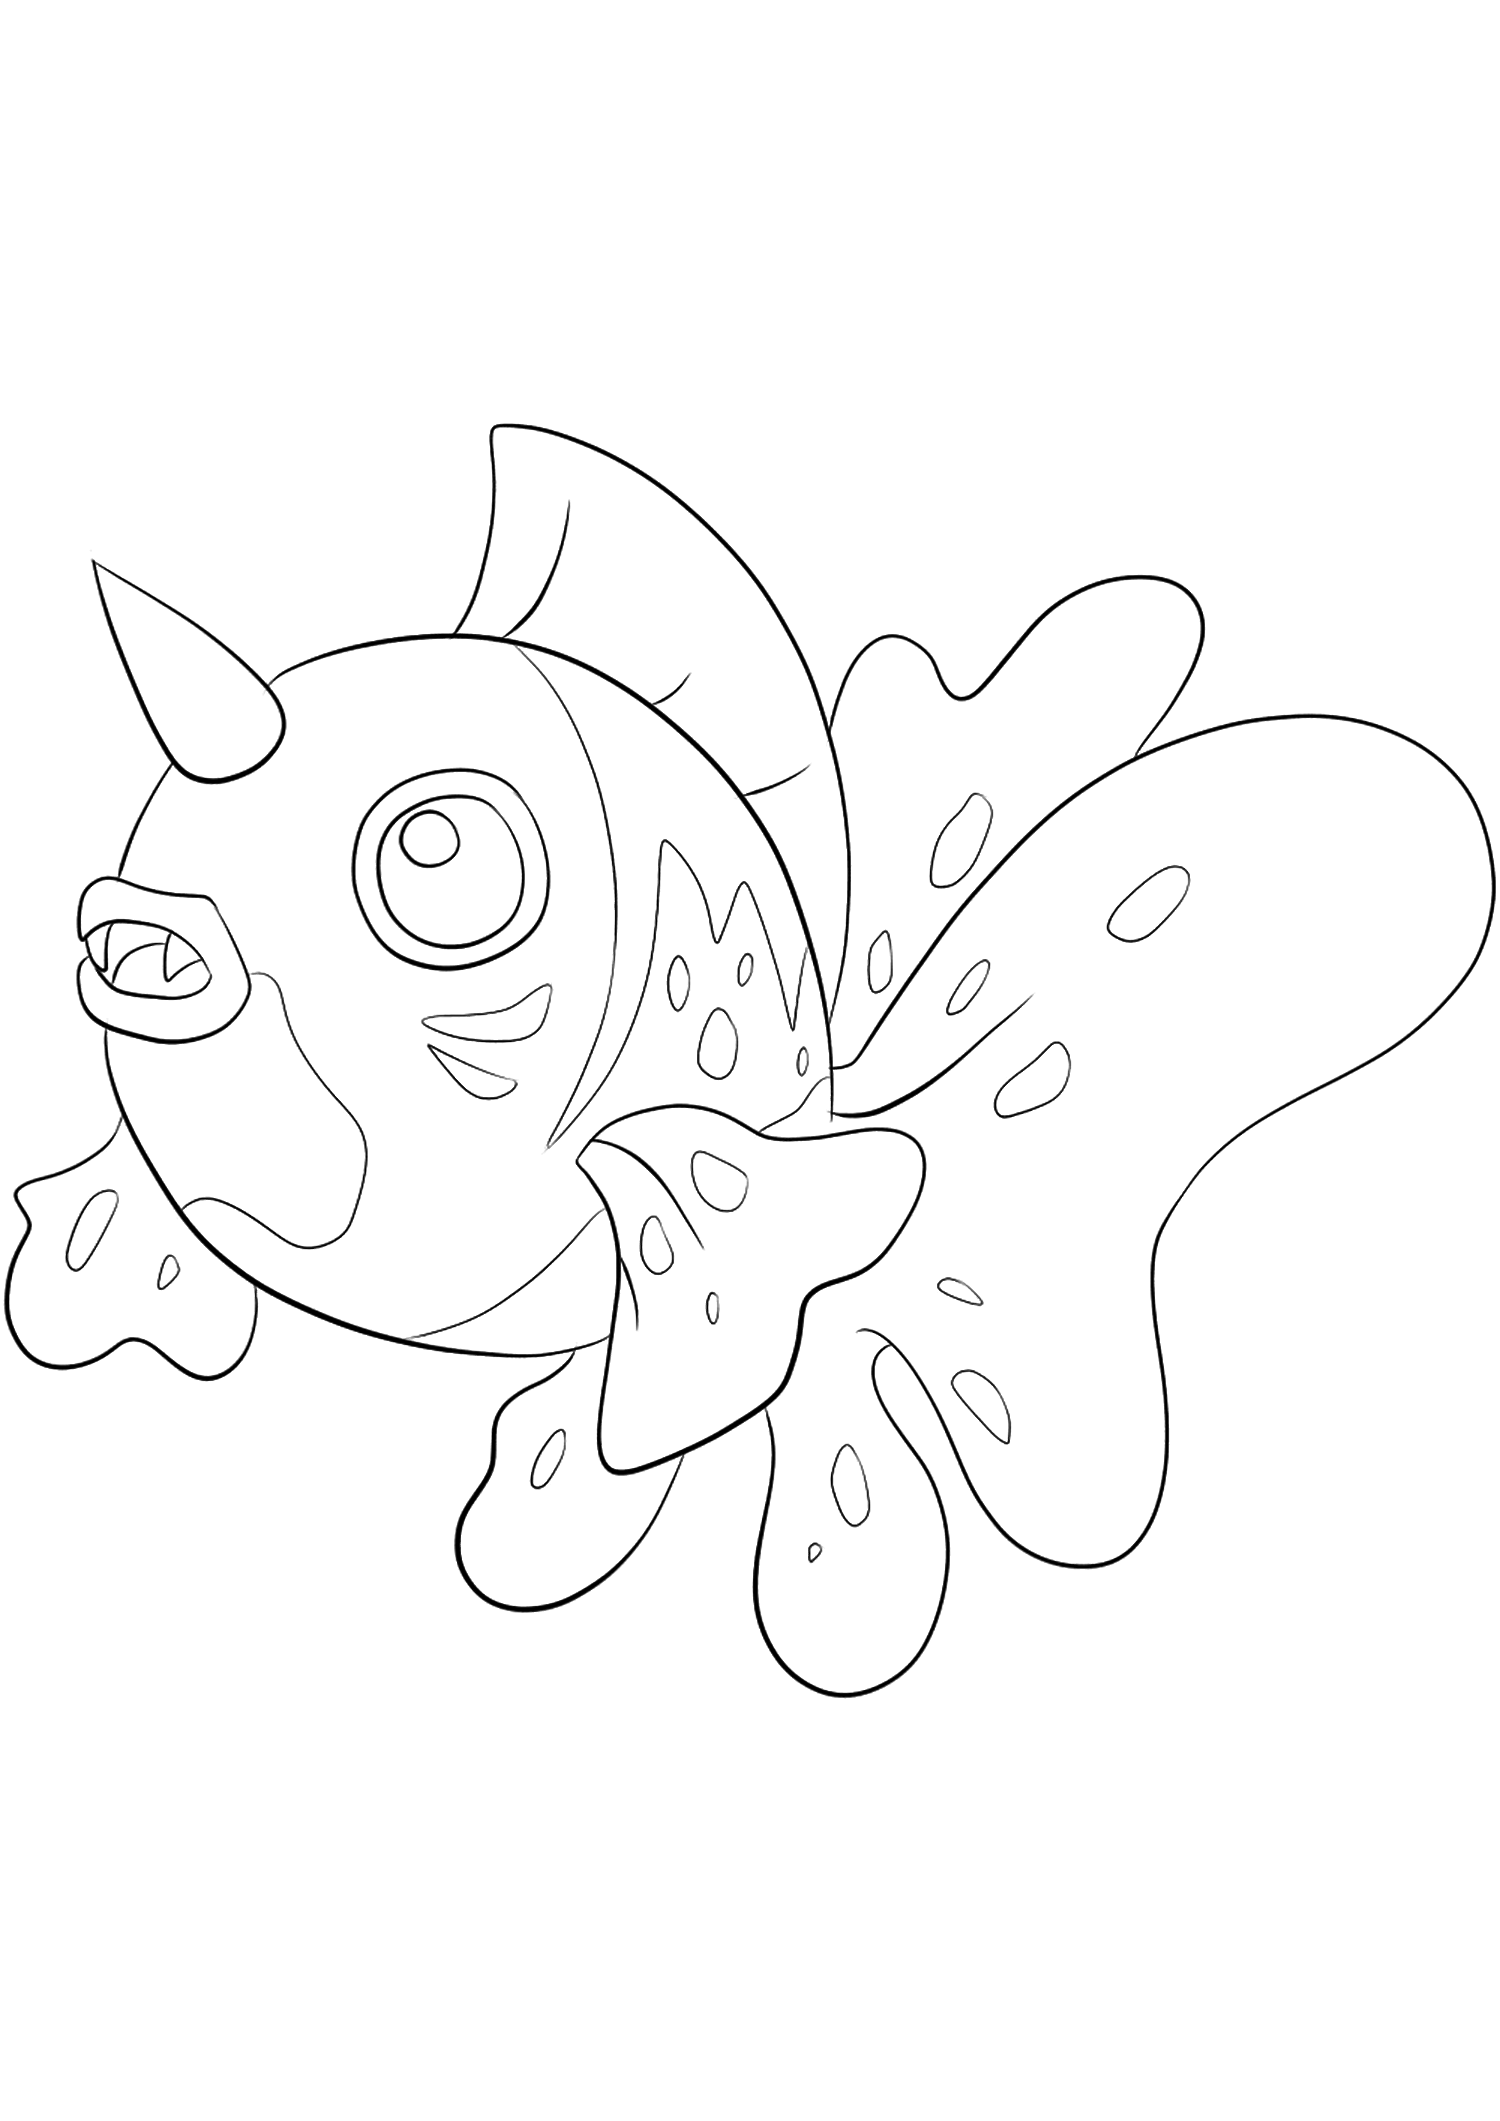 Seaking (No.119). Seaking Coloring page, Generation I Pokemon of type WaterOriginal image credit: Pokemon linearts by Lilly Gerbil on Deviantart.Permission:  All rights reserved © Pokemon company and Ken Sugimori.